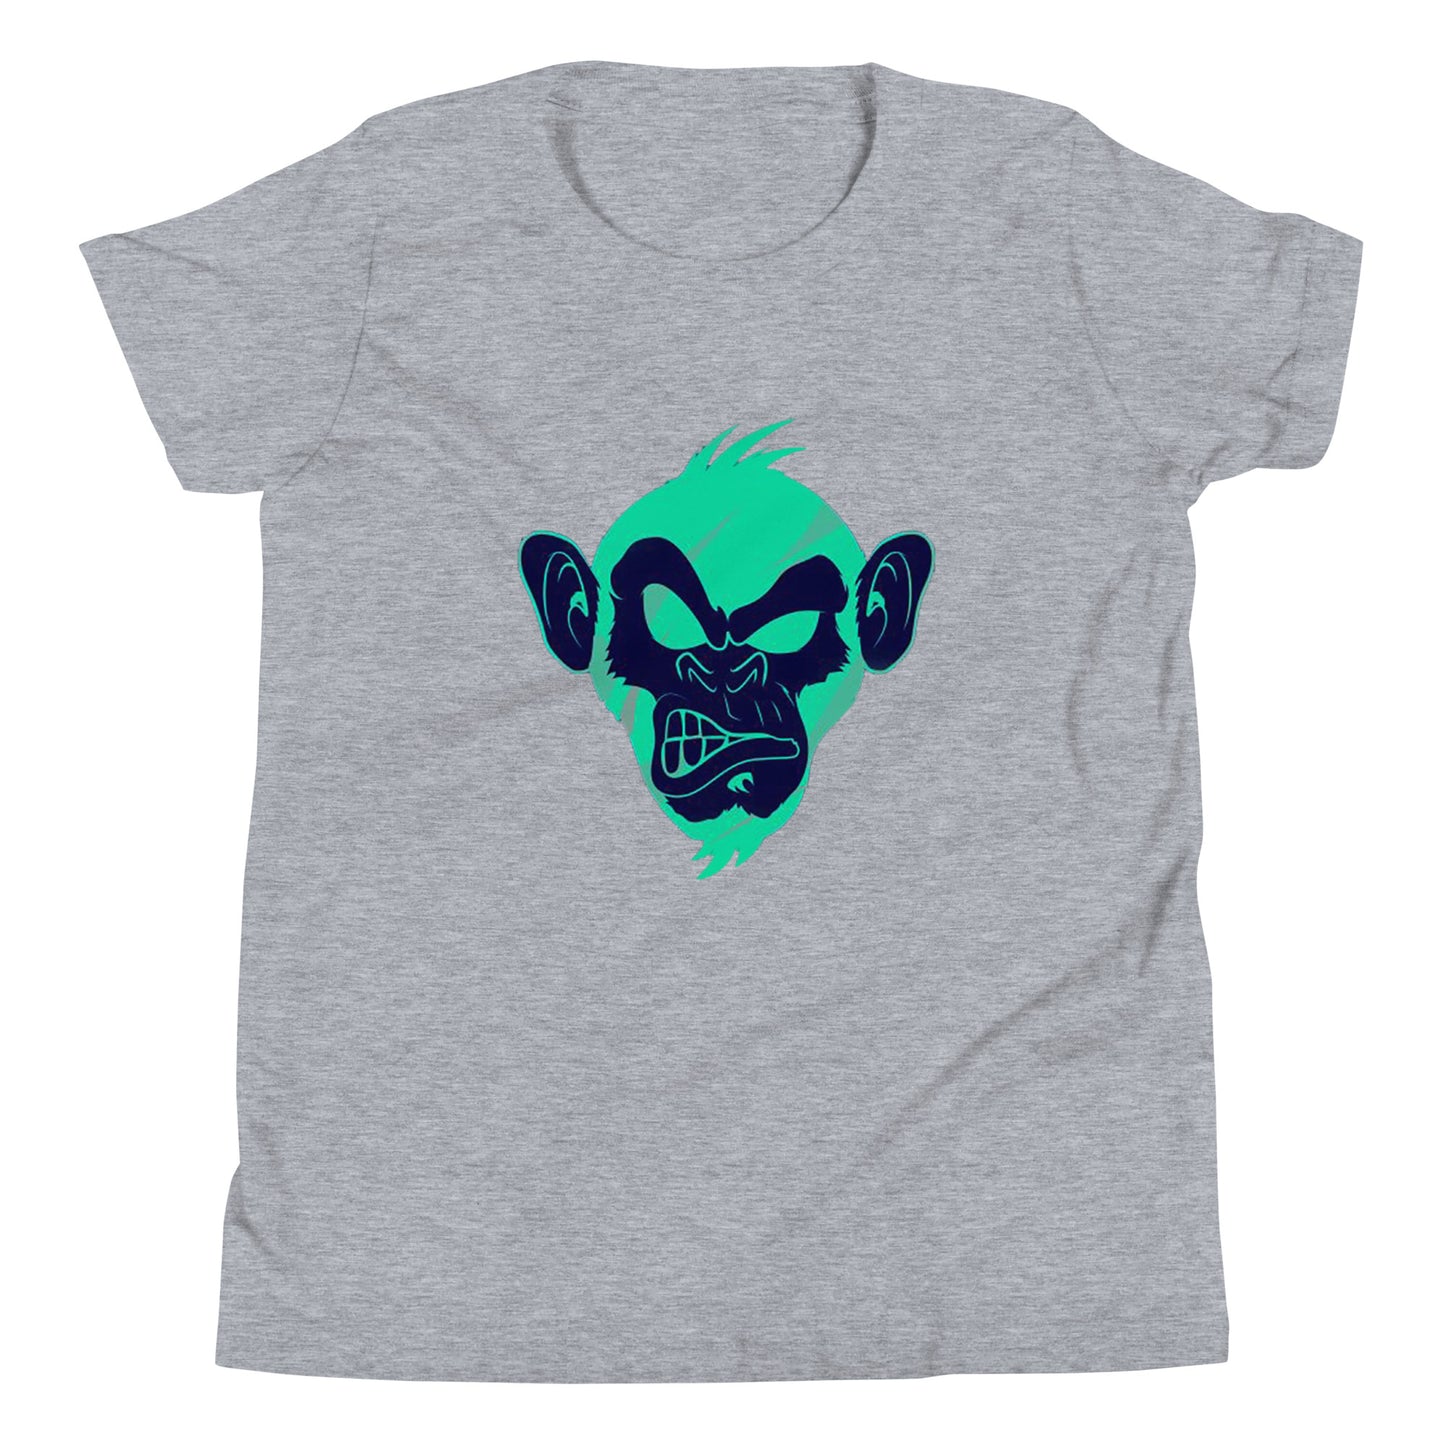 Athletic grey T-shirt with print of a Cool monkey in black light green